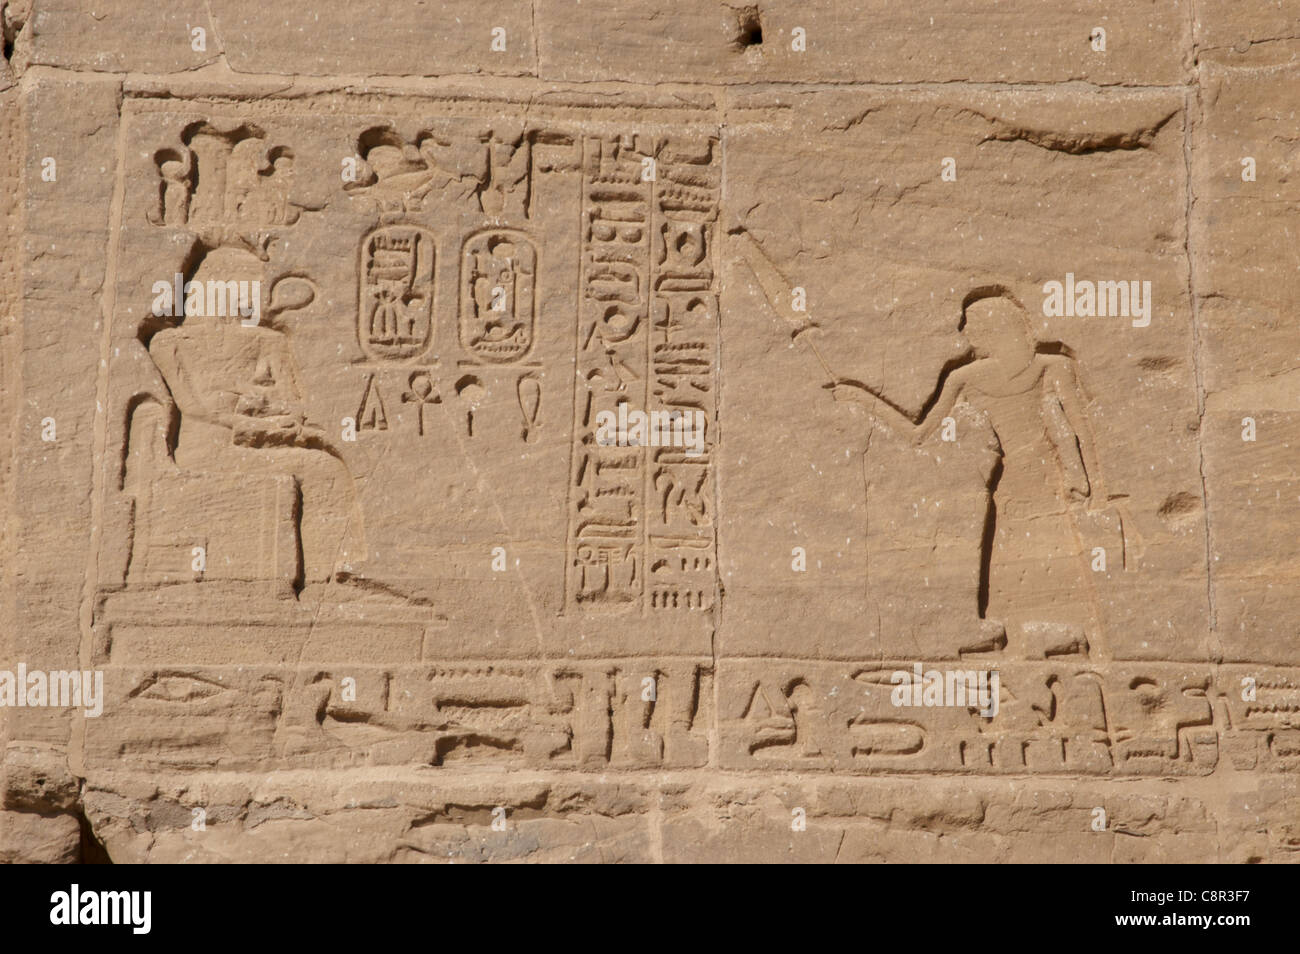 Reliefs depicting Ramses II and the royal cartridges. Abu Simbel. Egypt. Stock Photo